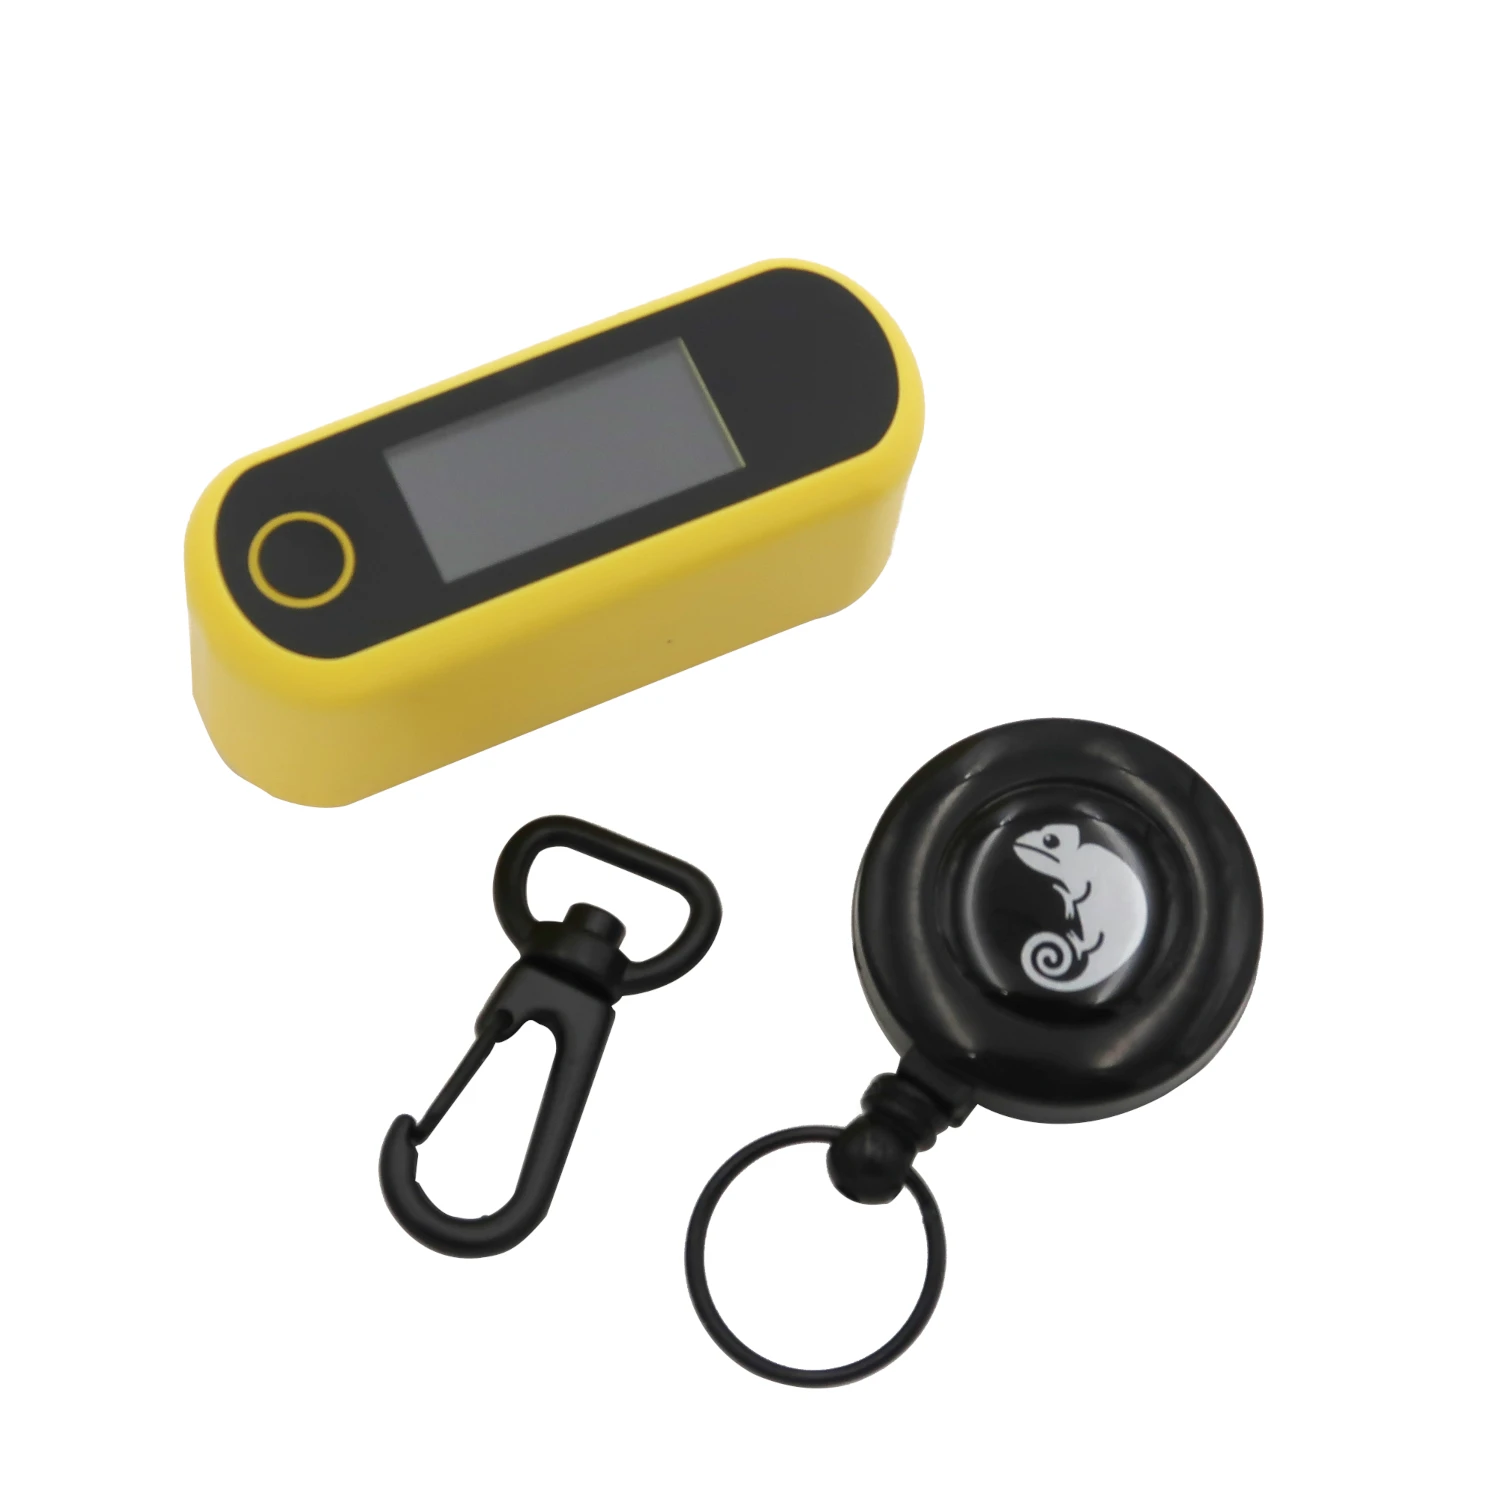 https://ae01.alicdn.com/kf/S2cded7efc57448dd8d9f607048842cceI/Brook-Pocket-Auto-Catch-Carry-Type-C-Charging-Dual-Accounts-for-Pokeon-Go-for-Pokemon-Go.jpg